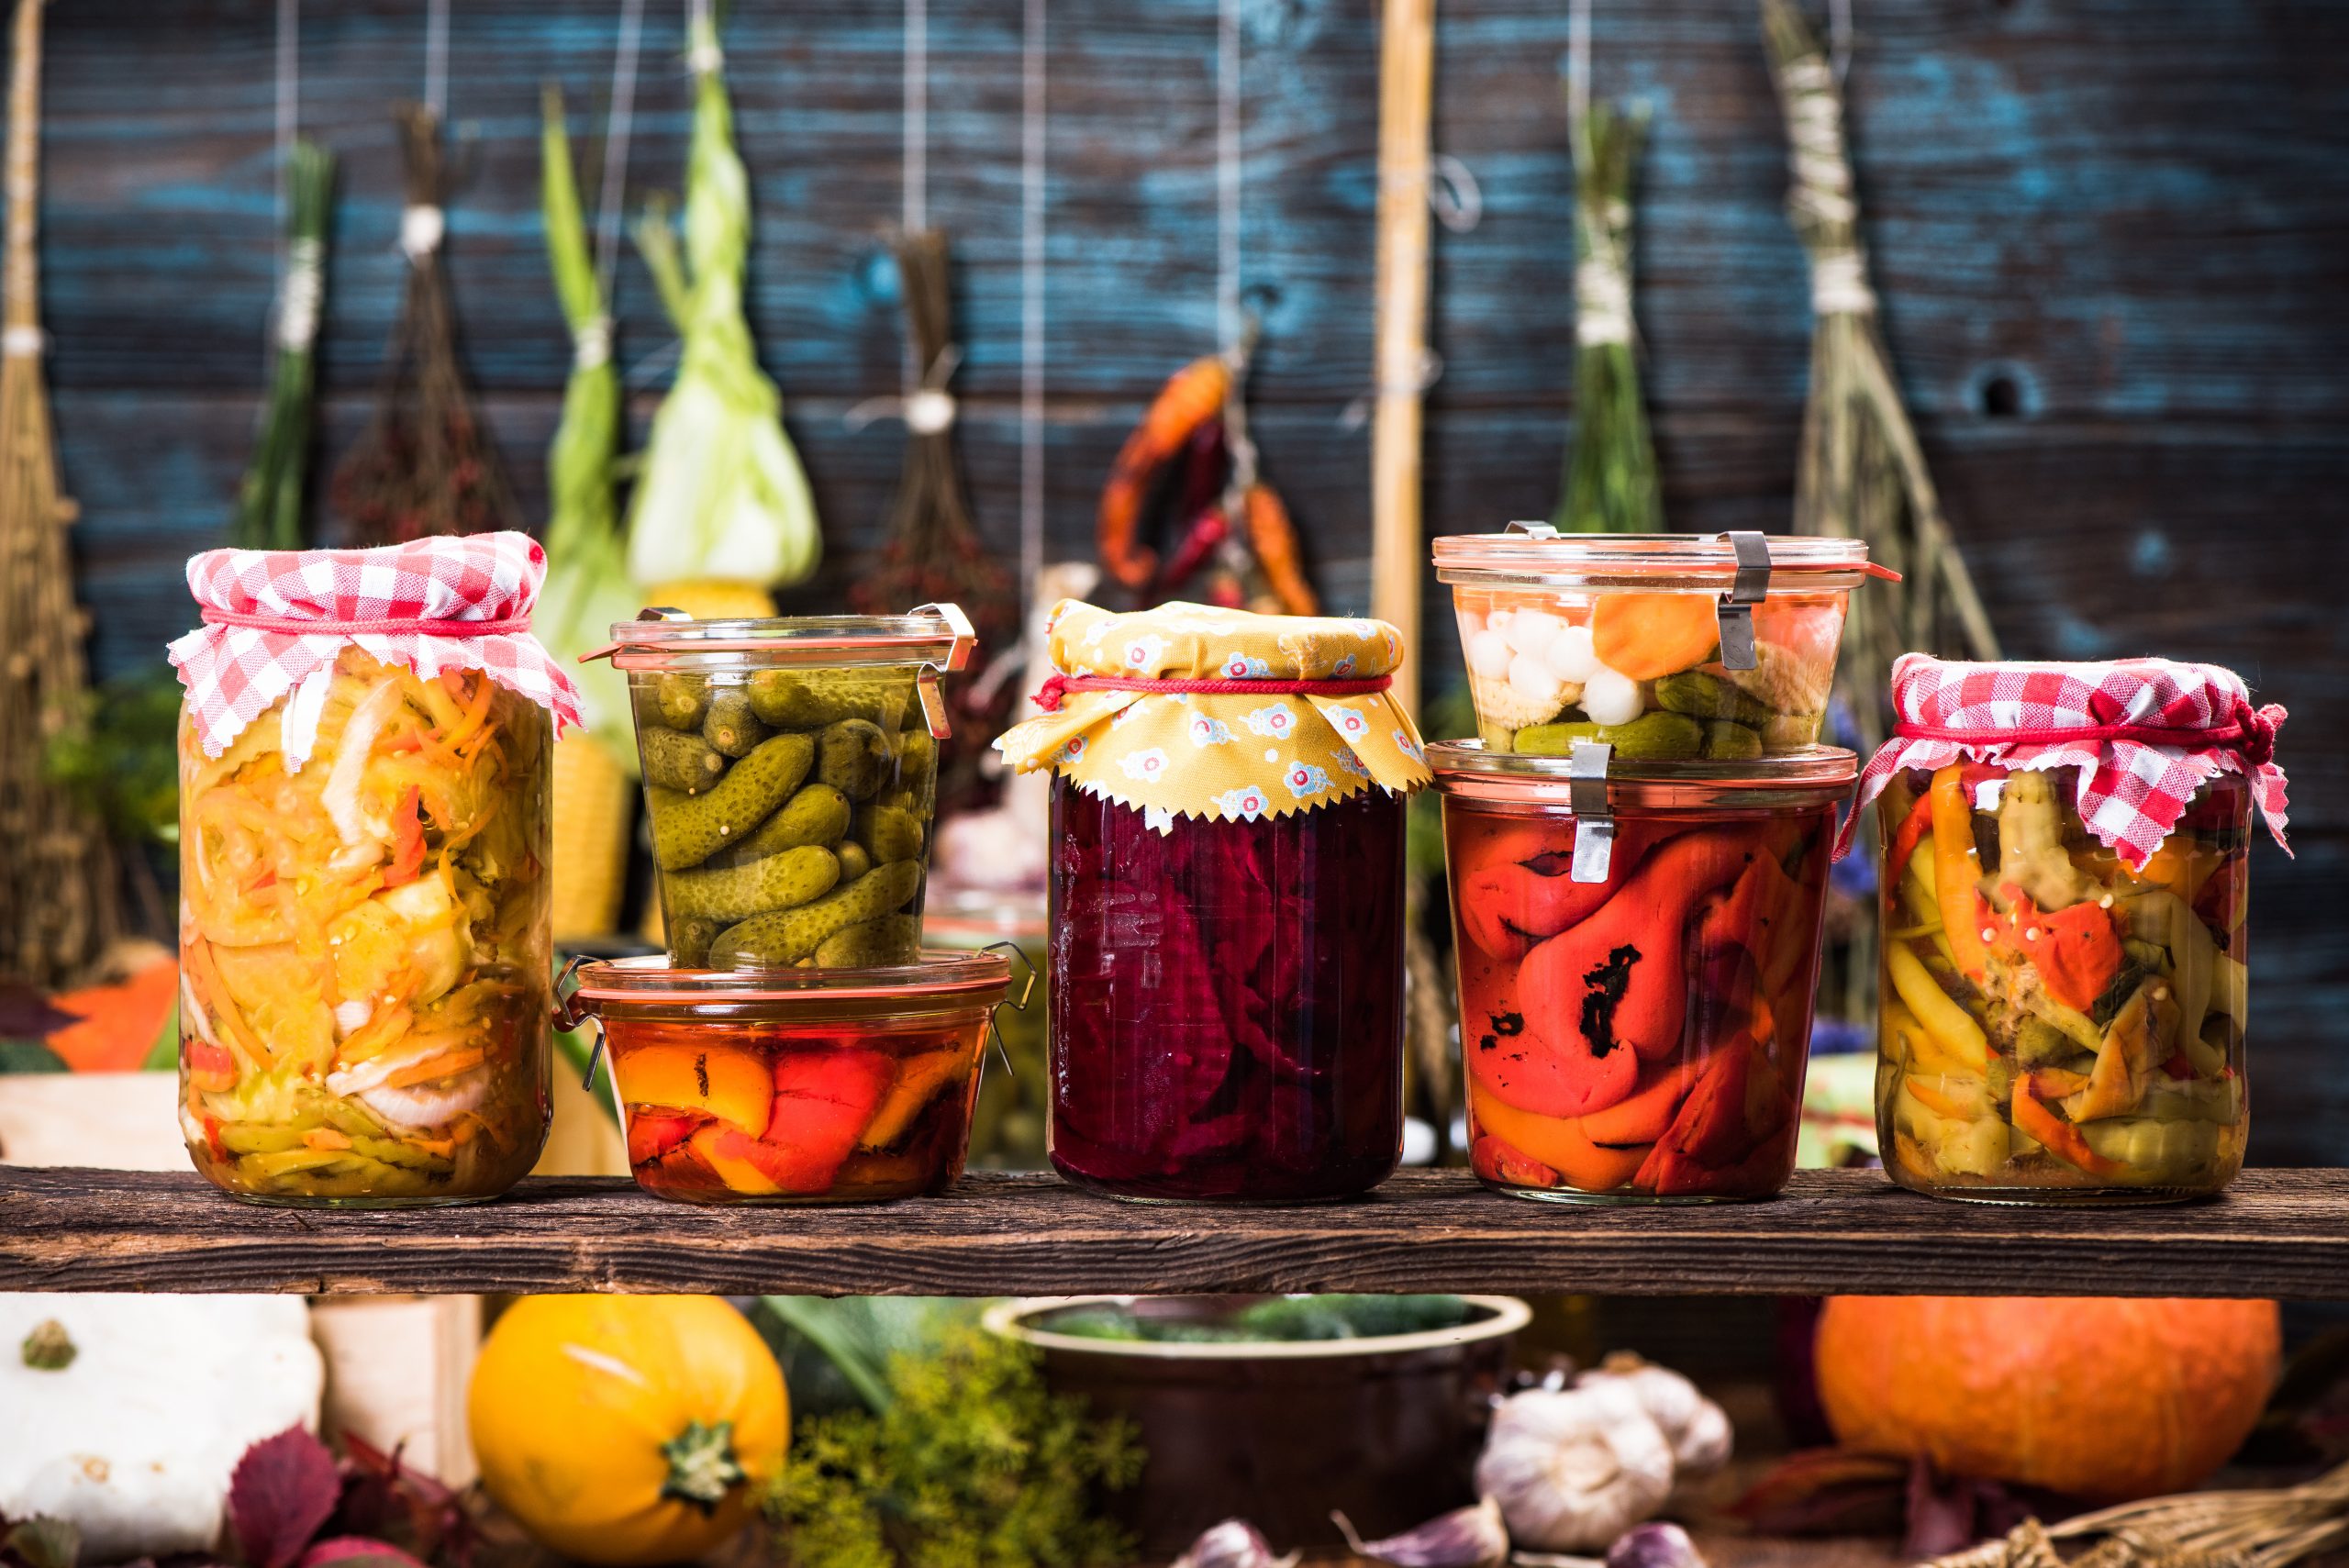 Various homemade pickles in glass jars on a wooden table, surrounded by fresh vegetables and garlic.